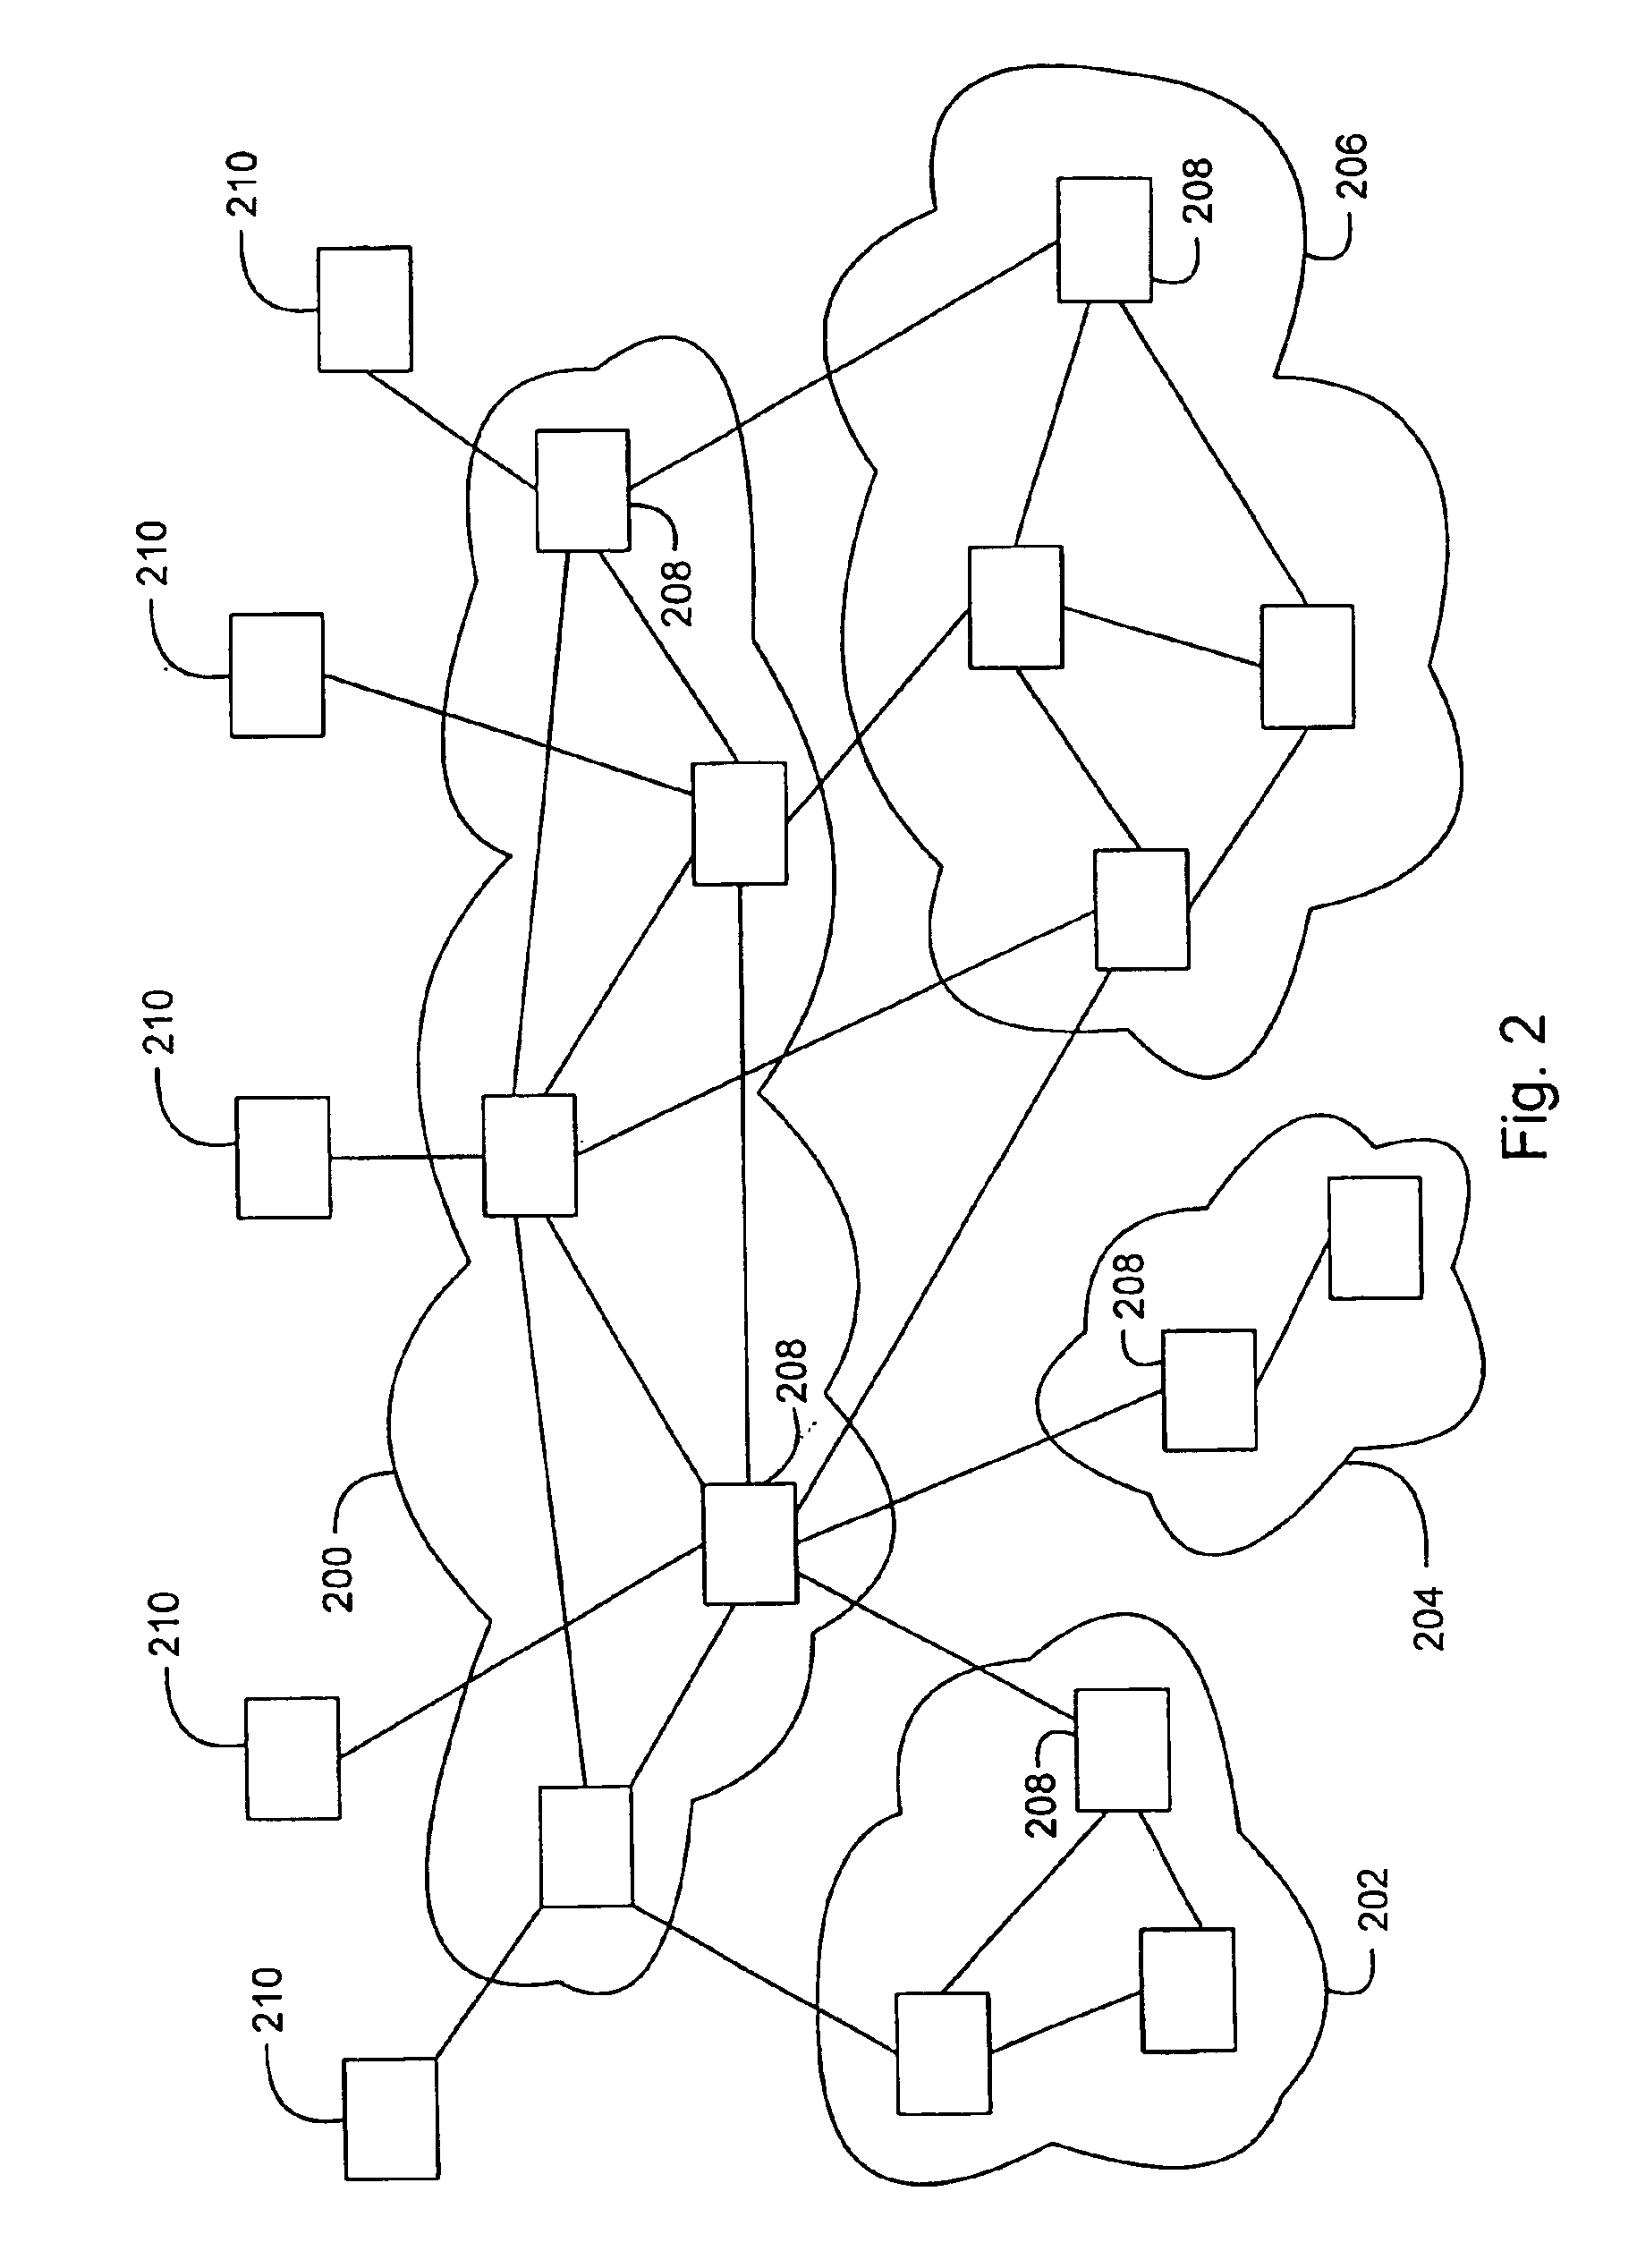 Proximity-based redirection system for robust and scalable service-node location in an internetwork